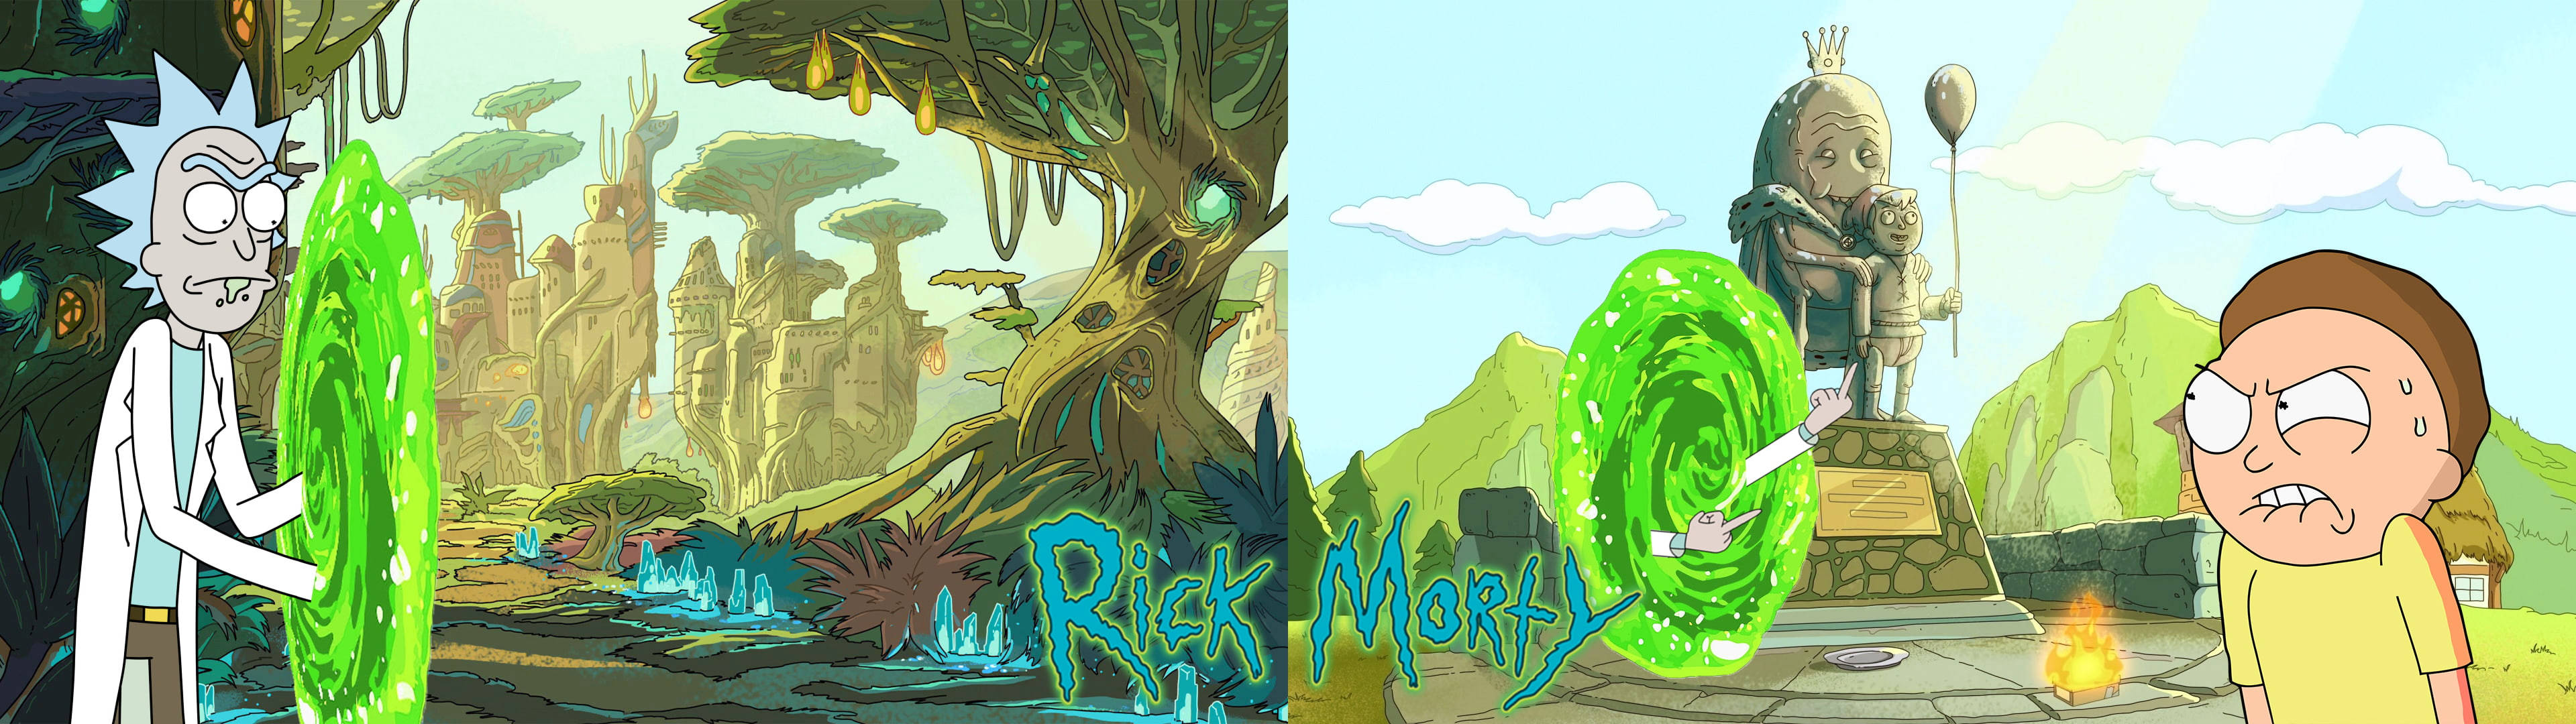 4k Dual Monitor Rick And Morty Background